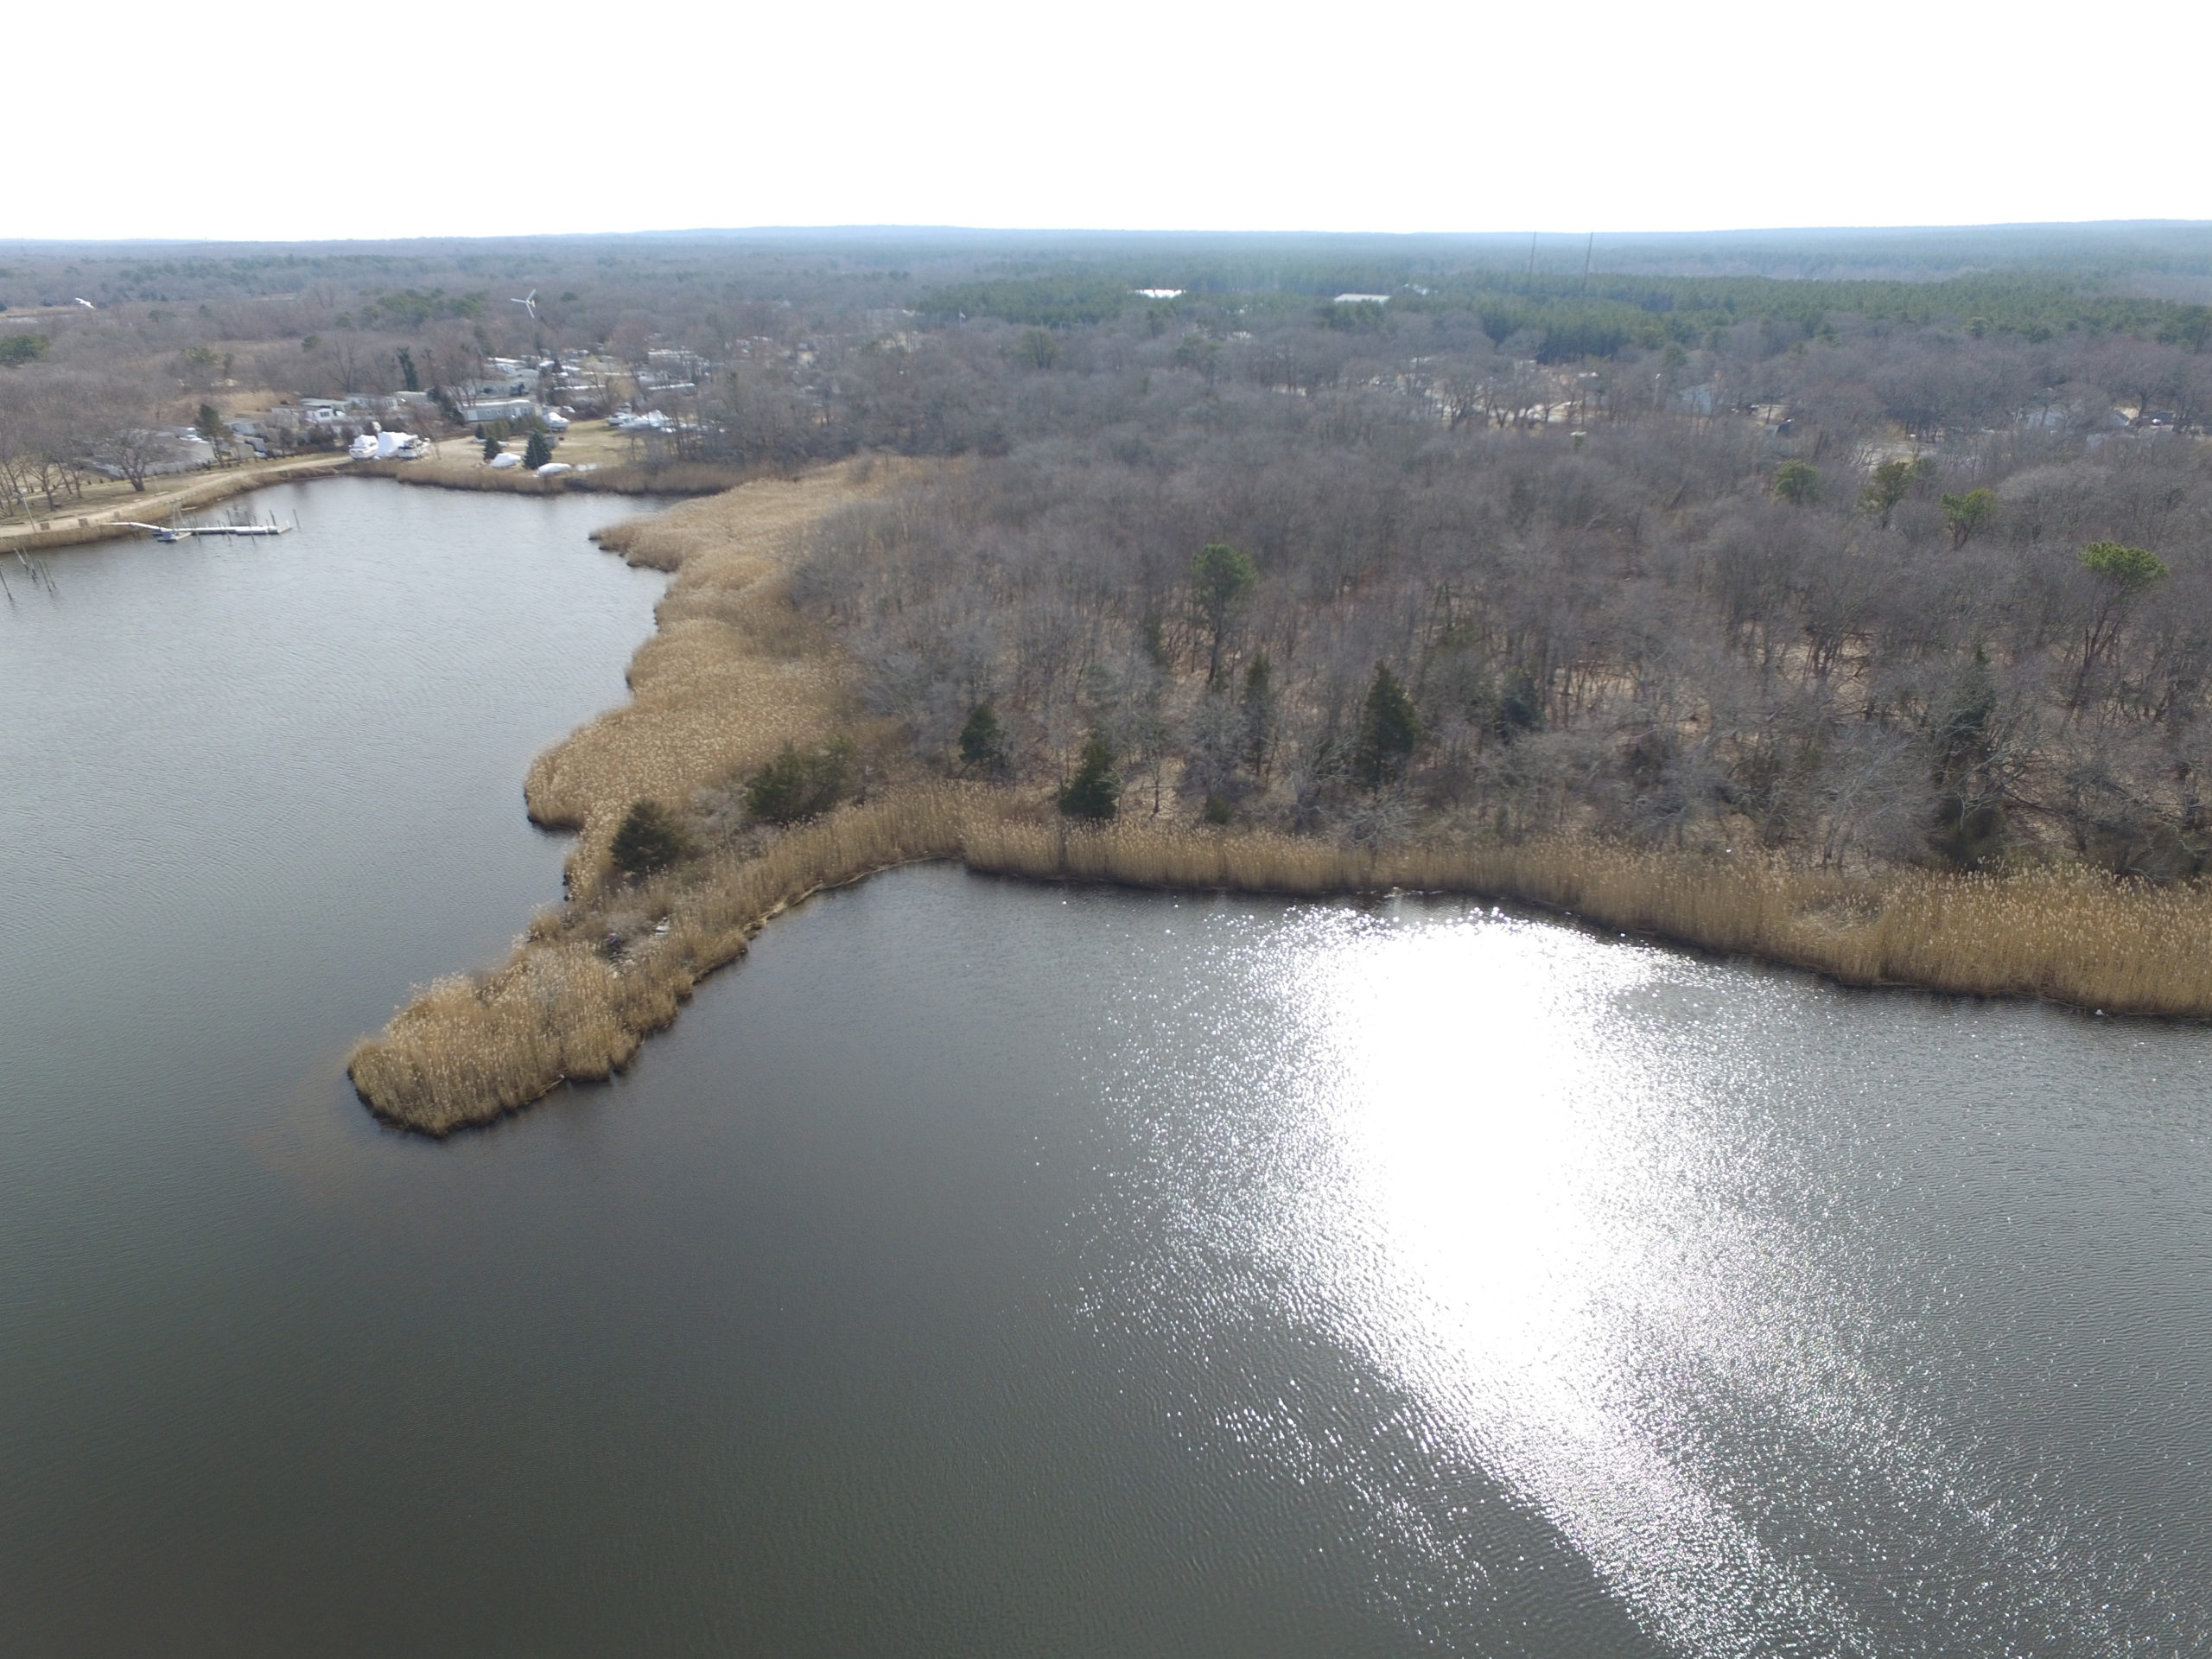 February 28 -- A developer’s plans for her shrinking Riverside property remain in limbo, as they have for nearly 20 years, though, this time, much of that uncertainty can be attributed to the still-unrealized potential in Southampton Town’s most economically distressed hamlet. Dede Gotthelf, who now owns 6.22 acres overlooking the Peconic Riverroughly one-quarter of what she had owned when she began investing in Riverside in the late 1990s—says the planned construction of a sewage treatment plant in the town’s nearby Enterprise Zone could open her remaining land, as well as neighboring properties, to new possibilities. She said those options could potentially include the construction of dozens of new units of much-needed workforce housing in the municipality, or the addition of several new waterfront businesses, possibly restaurants that would overlook the water and sit across from Riverhead Town’s bustling downtown. “I think it is a phenomenal piece of property in the overall attempt to revitalize Riverside, and I think something wonderful should happen with it,” said Ms. Gotthelf, who currently has no formal application in the works. Diana Weir, the town’s director of Housing and Community Development, said she has had several conversations with Ms. Gotthelf regarding her property over the past few months. Citing the pending construction of the sewage treatment plant, Ms. Weir said it is too early to know if it makes sense to build much-needed workforce housing complex on the site. She left open the possibility that there might be better uses for the land, noting that it could be the ideal place to offer outdoor recreational activities, such as kayaking or canoeing.